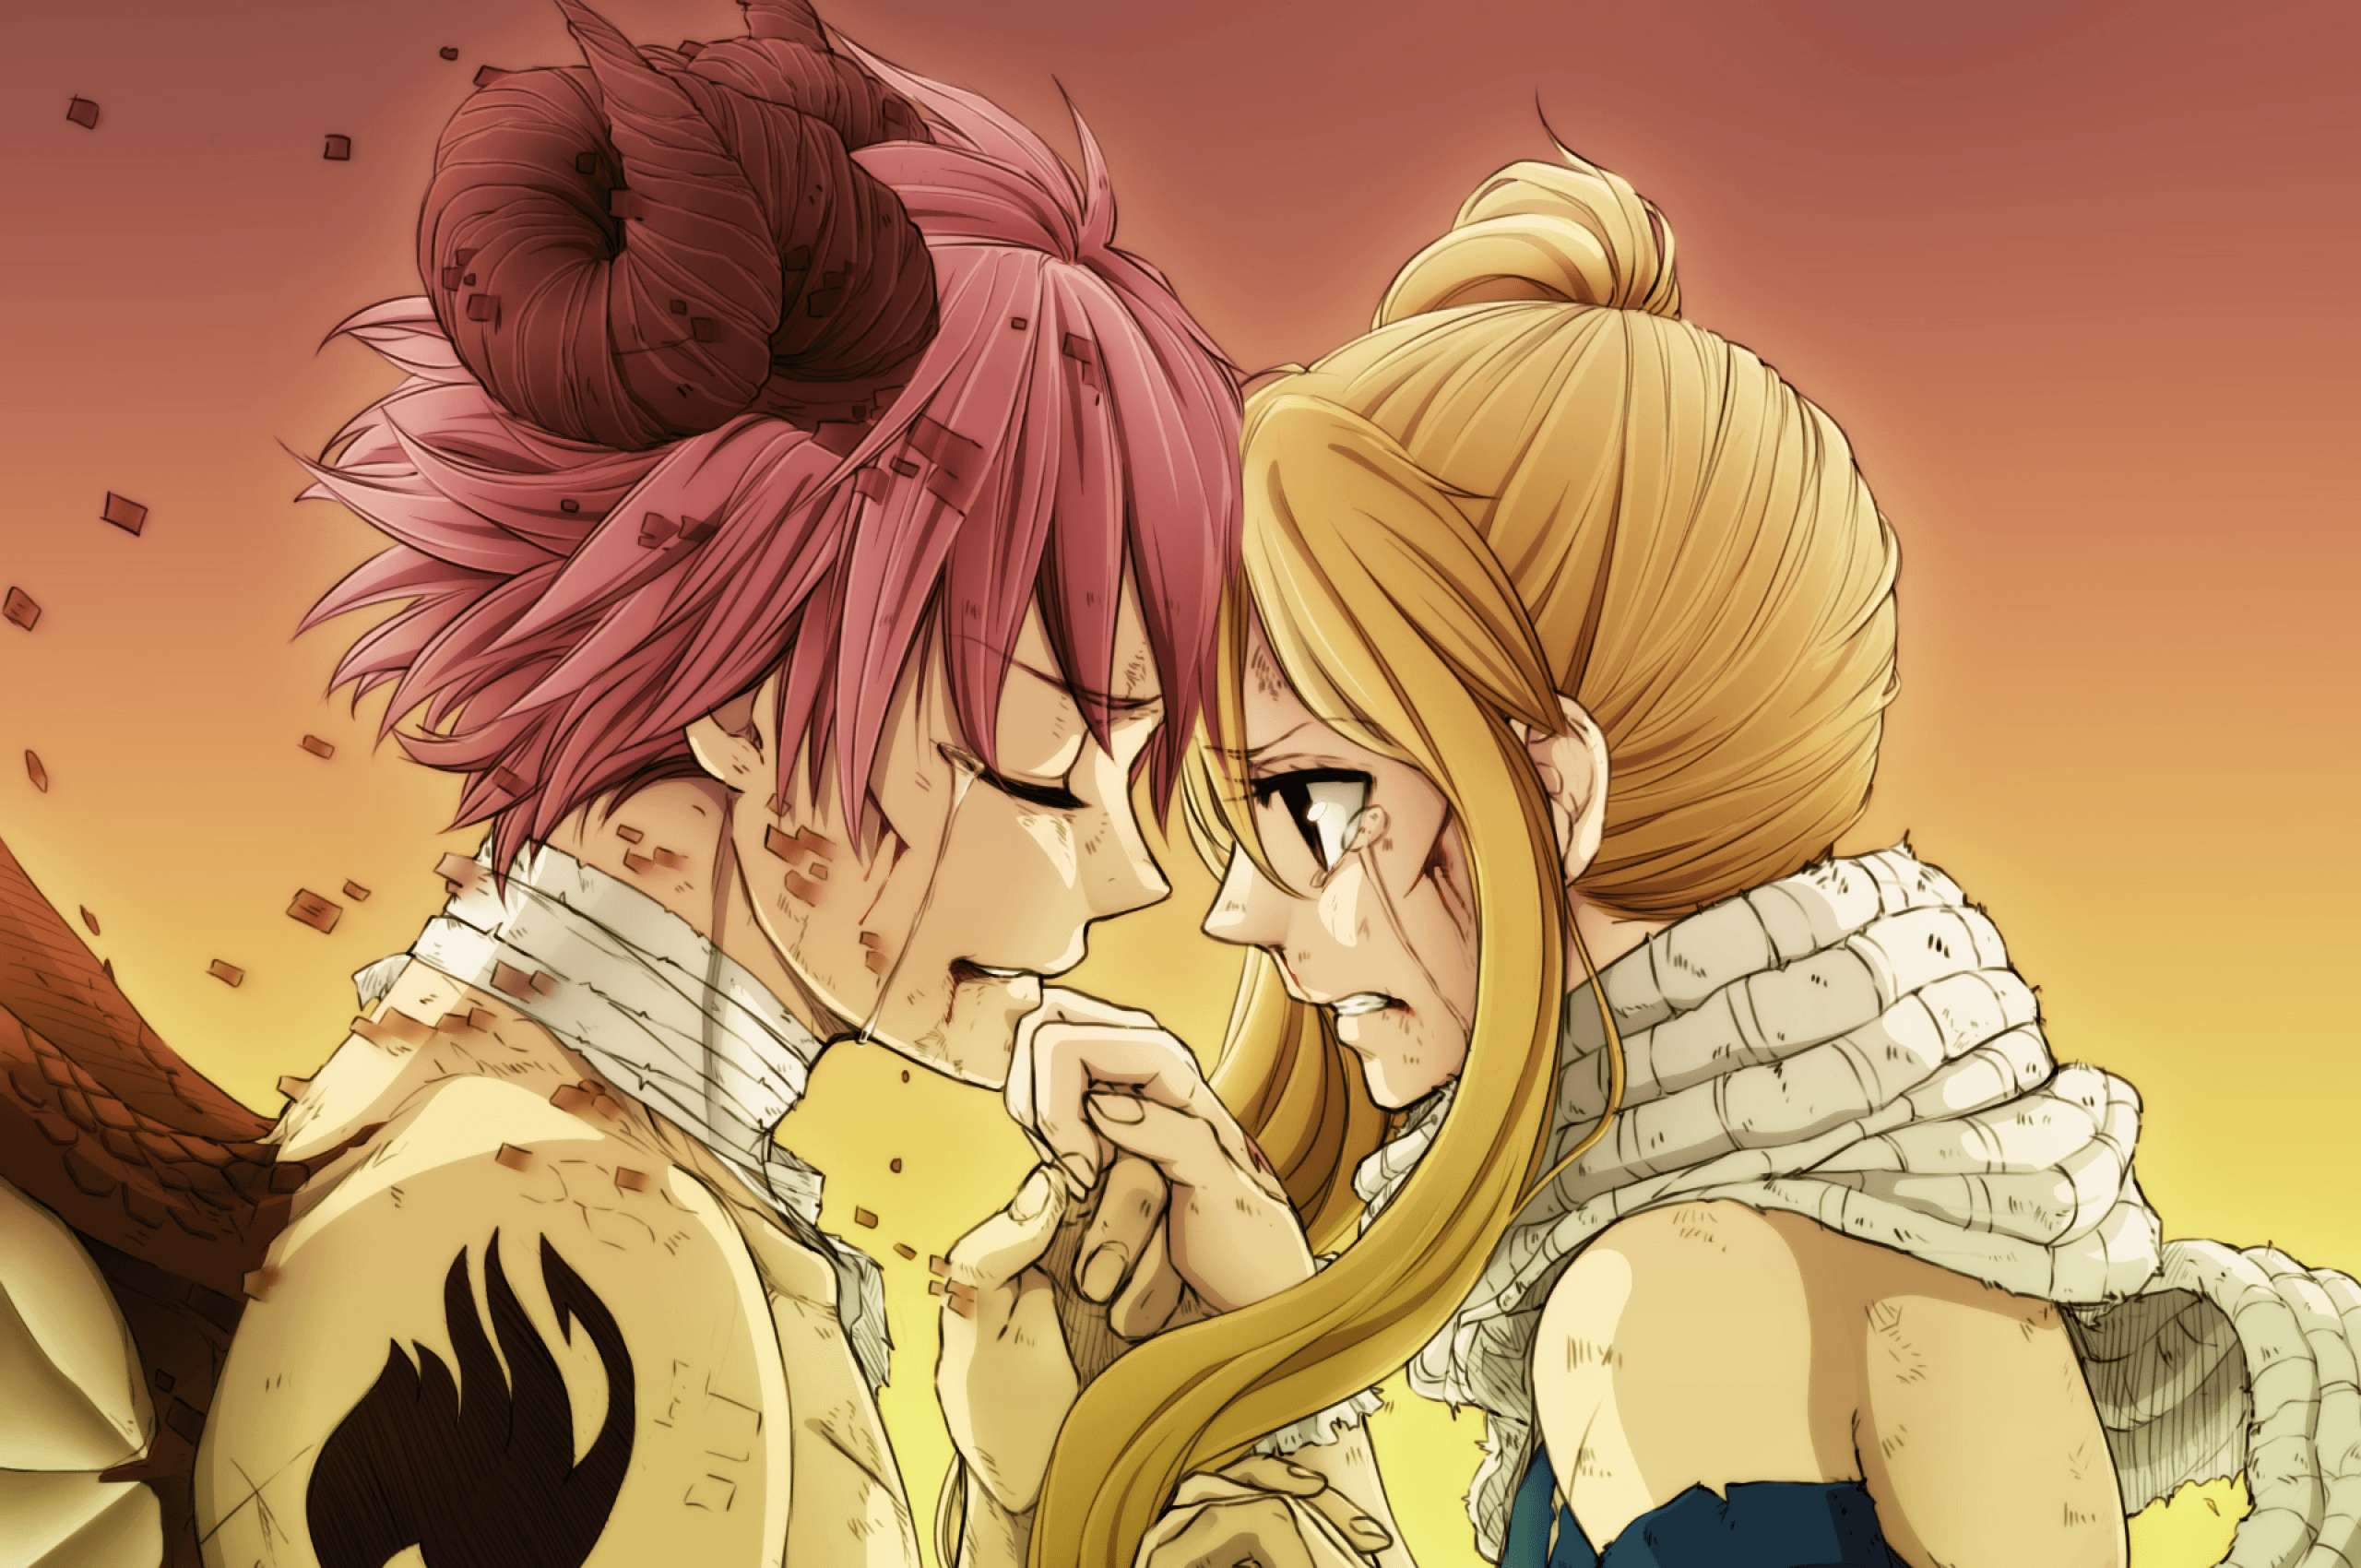 Download 2560x1700 Natsu X Lucy, Fairy Tail, Tears, Scarf, After